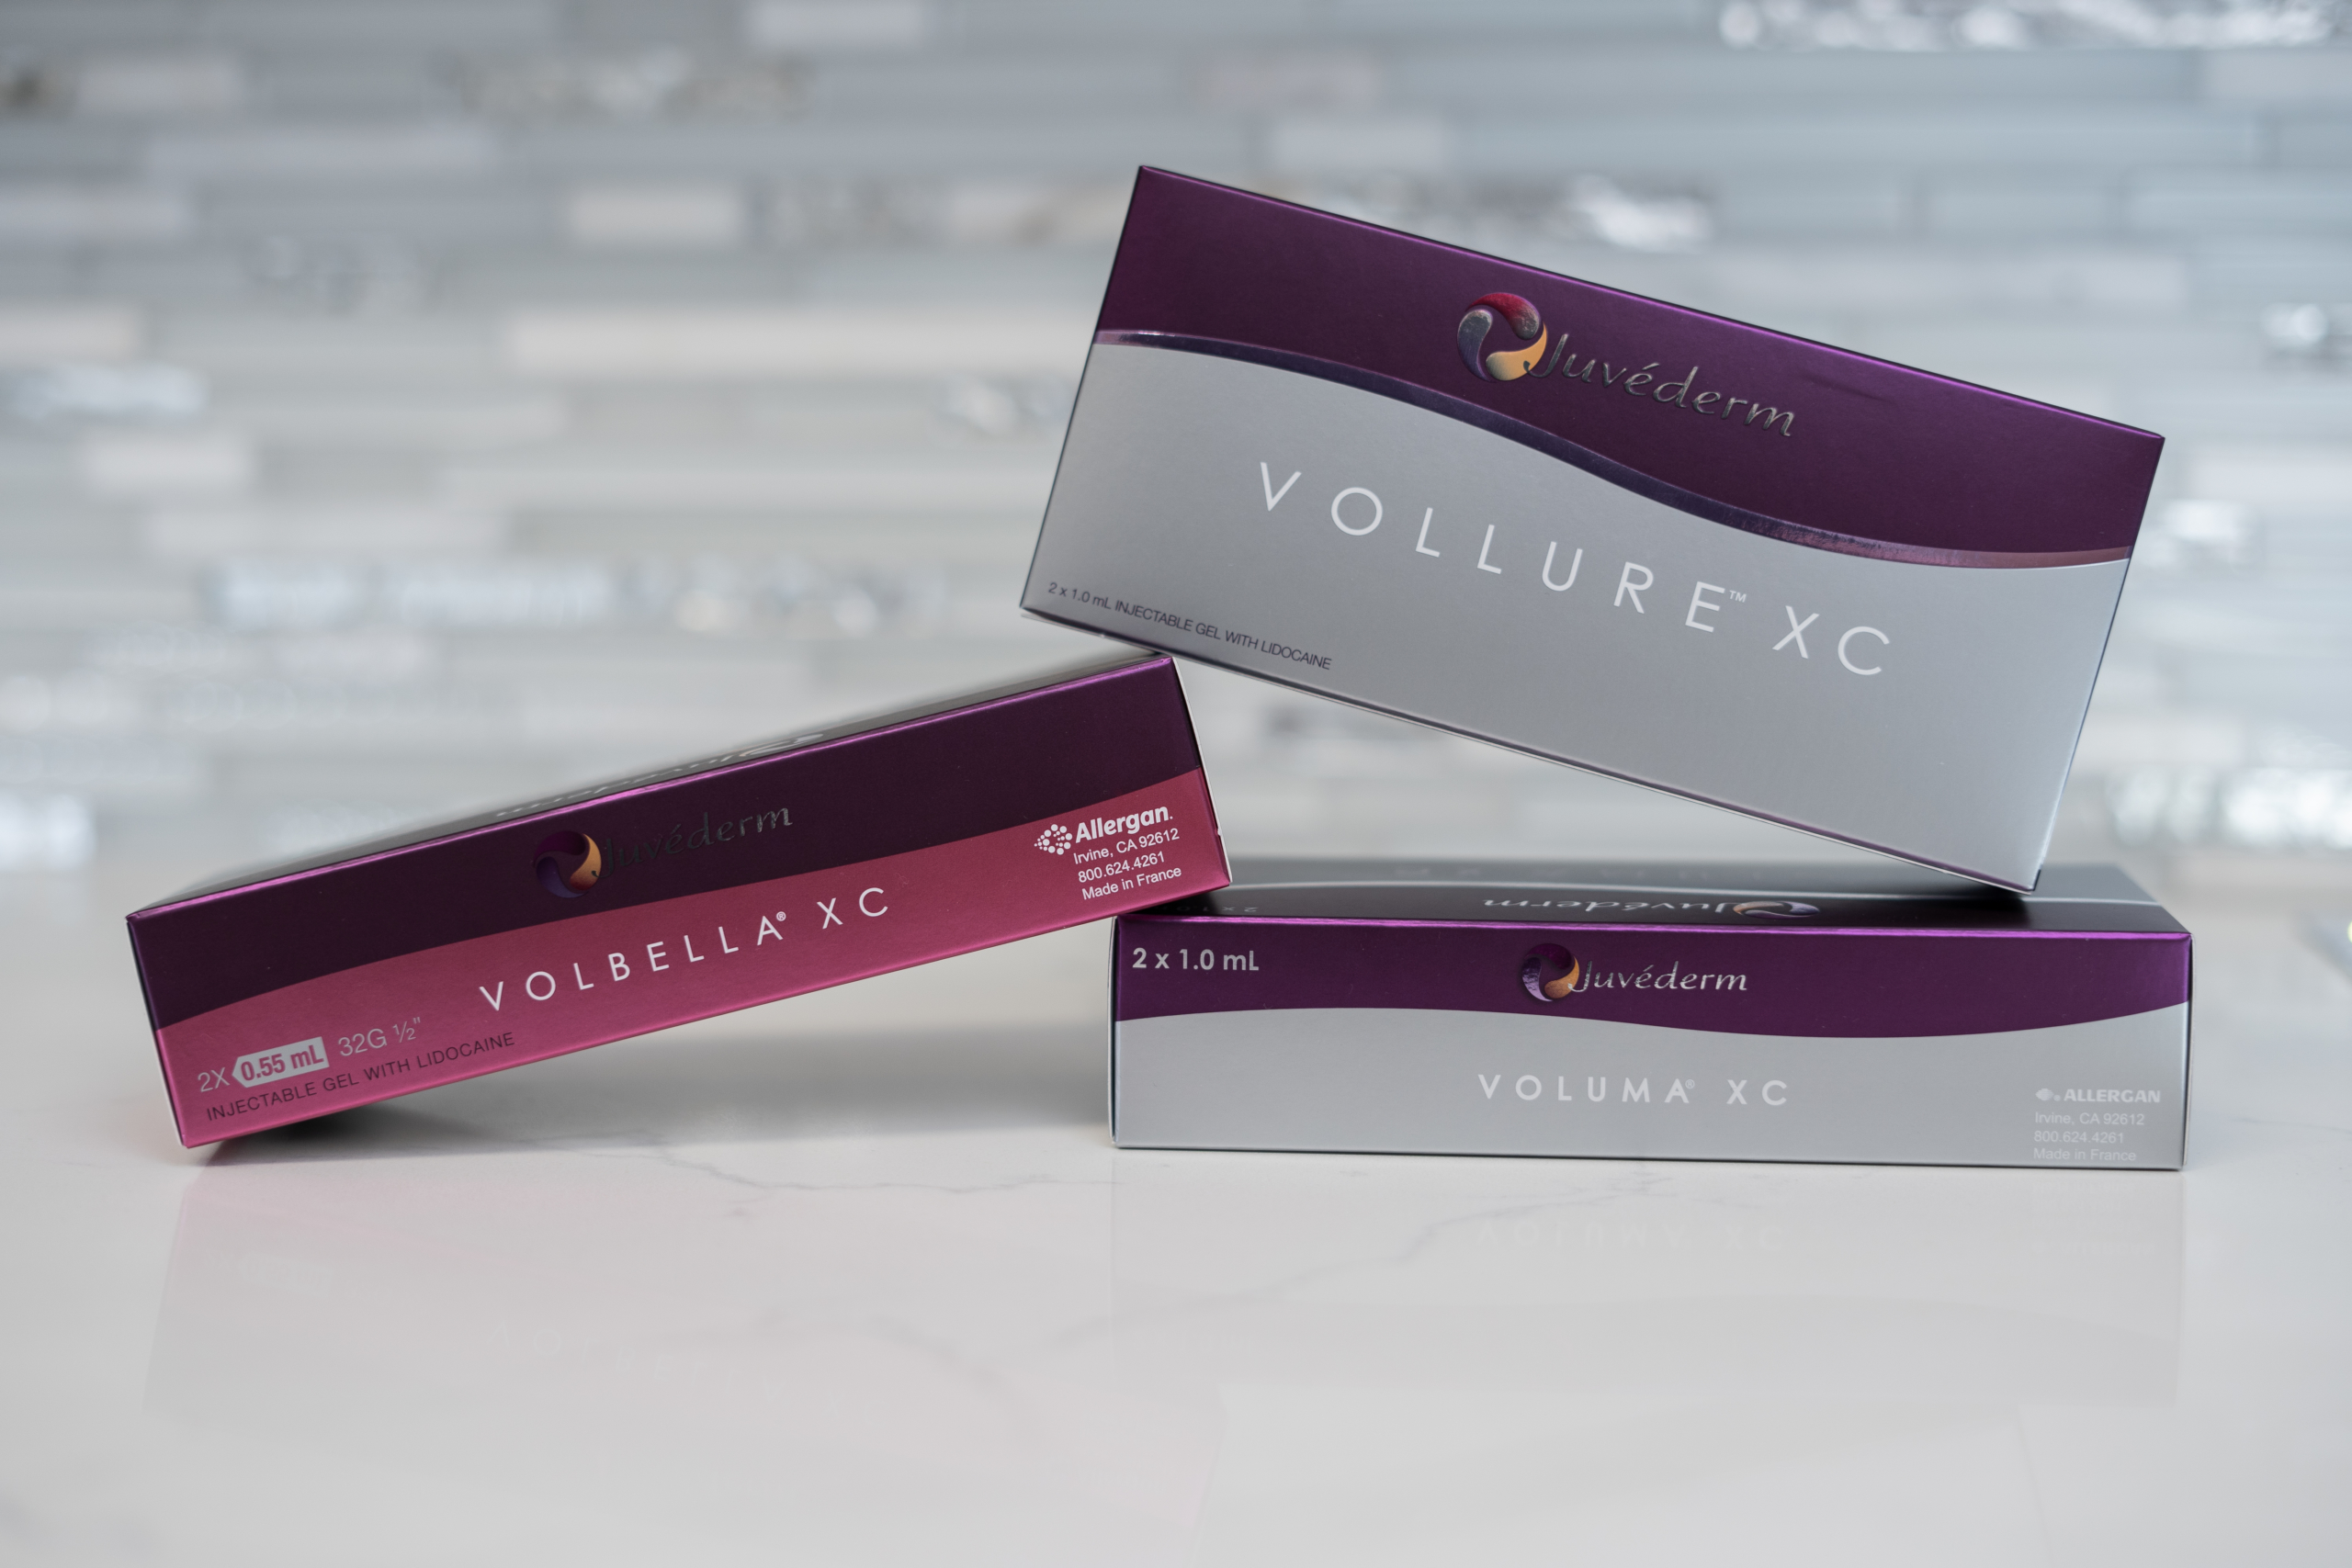 juvederm product boxes